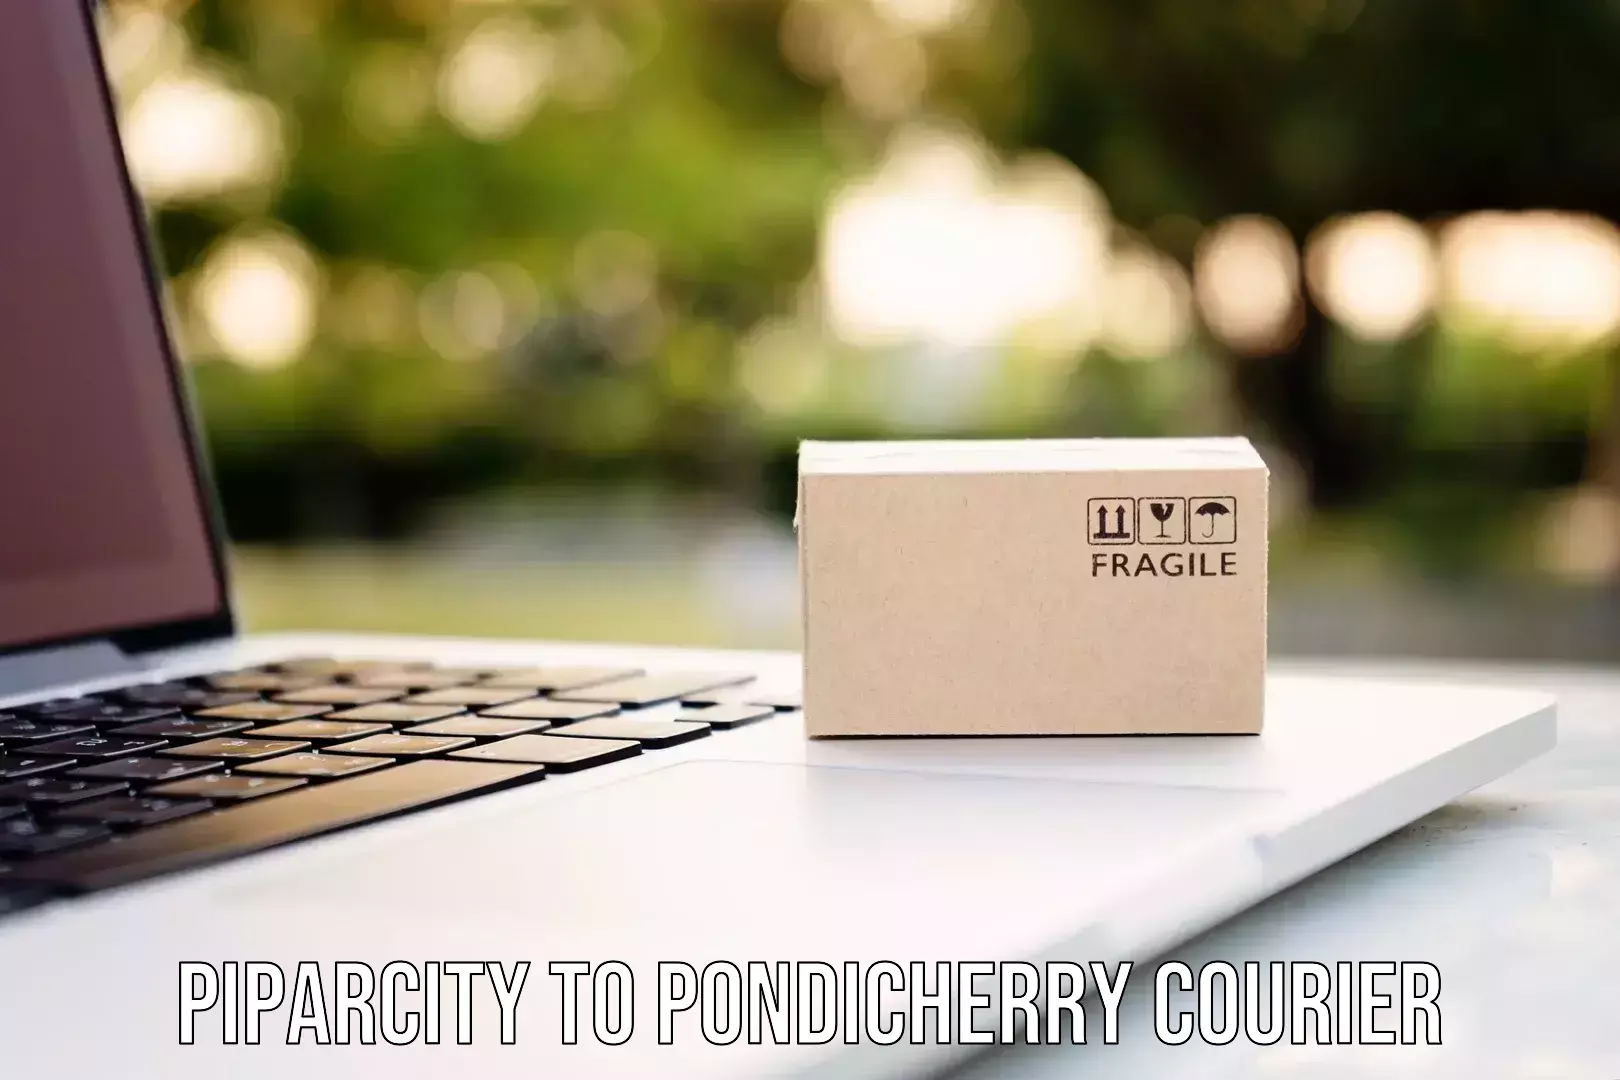 Quality courier partnerships Piparcity to Pondicherry